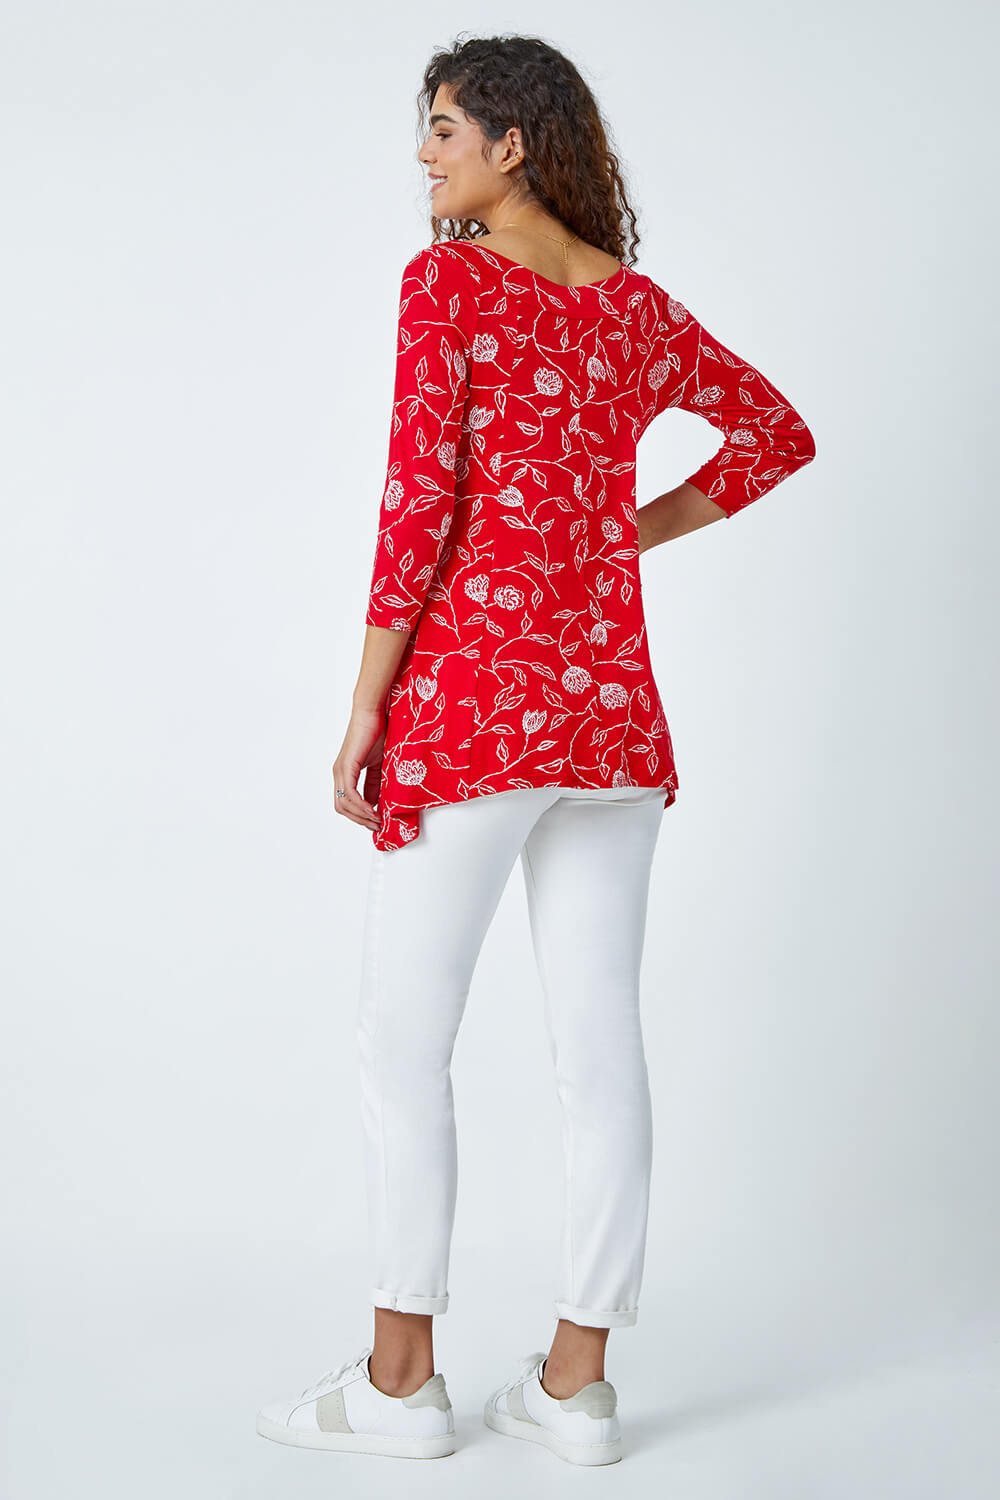 Red Floral Print Swing Stretch Top, Image 3 of 5